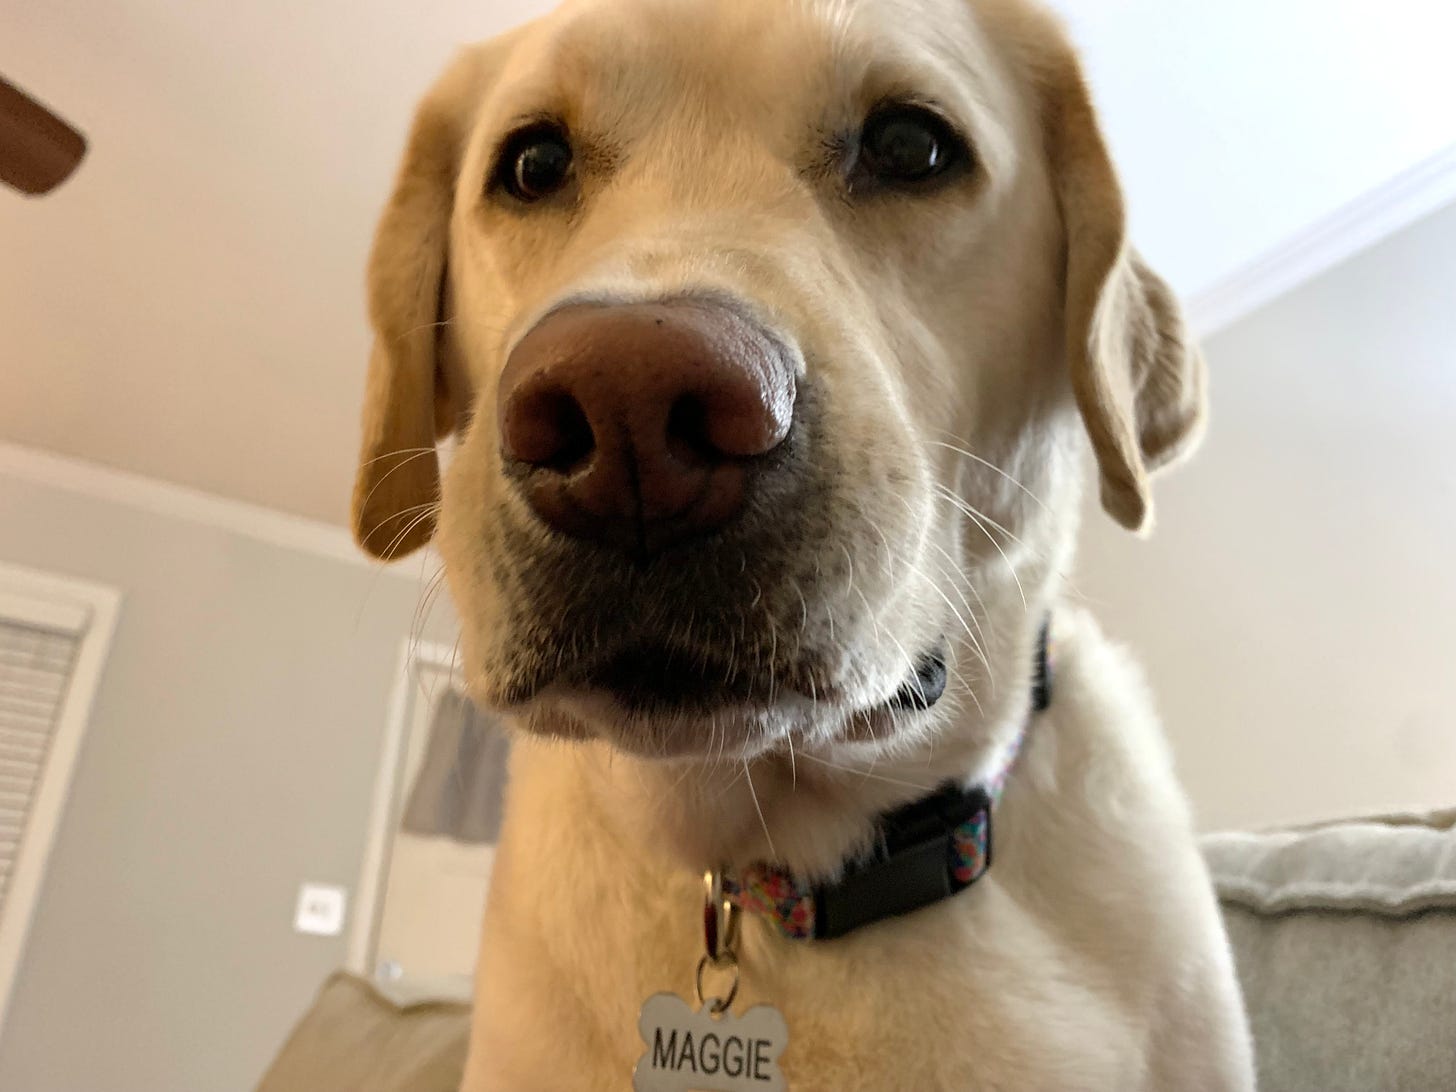 A yellow Labrador retriever sits on a couch and looms close looking cute with puppy dog eyes. She has a tag on her collar that says "Maggie."